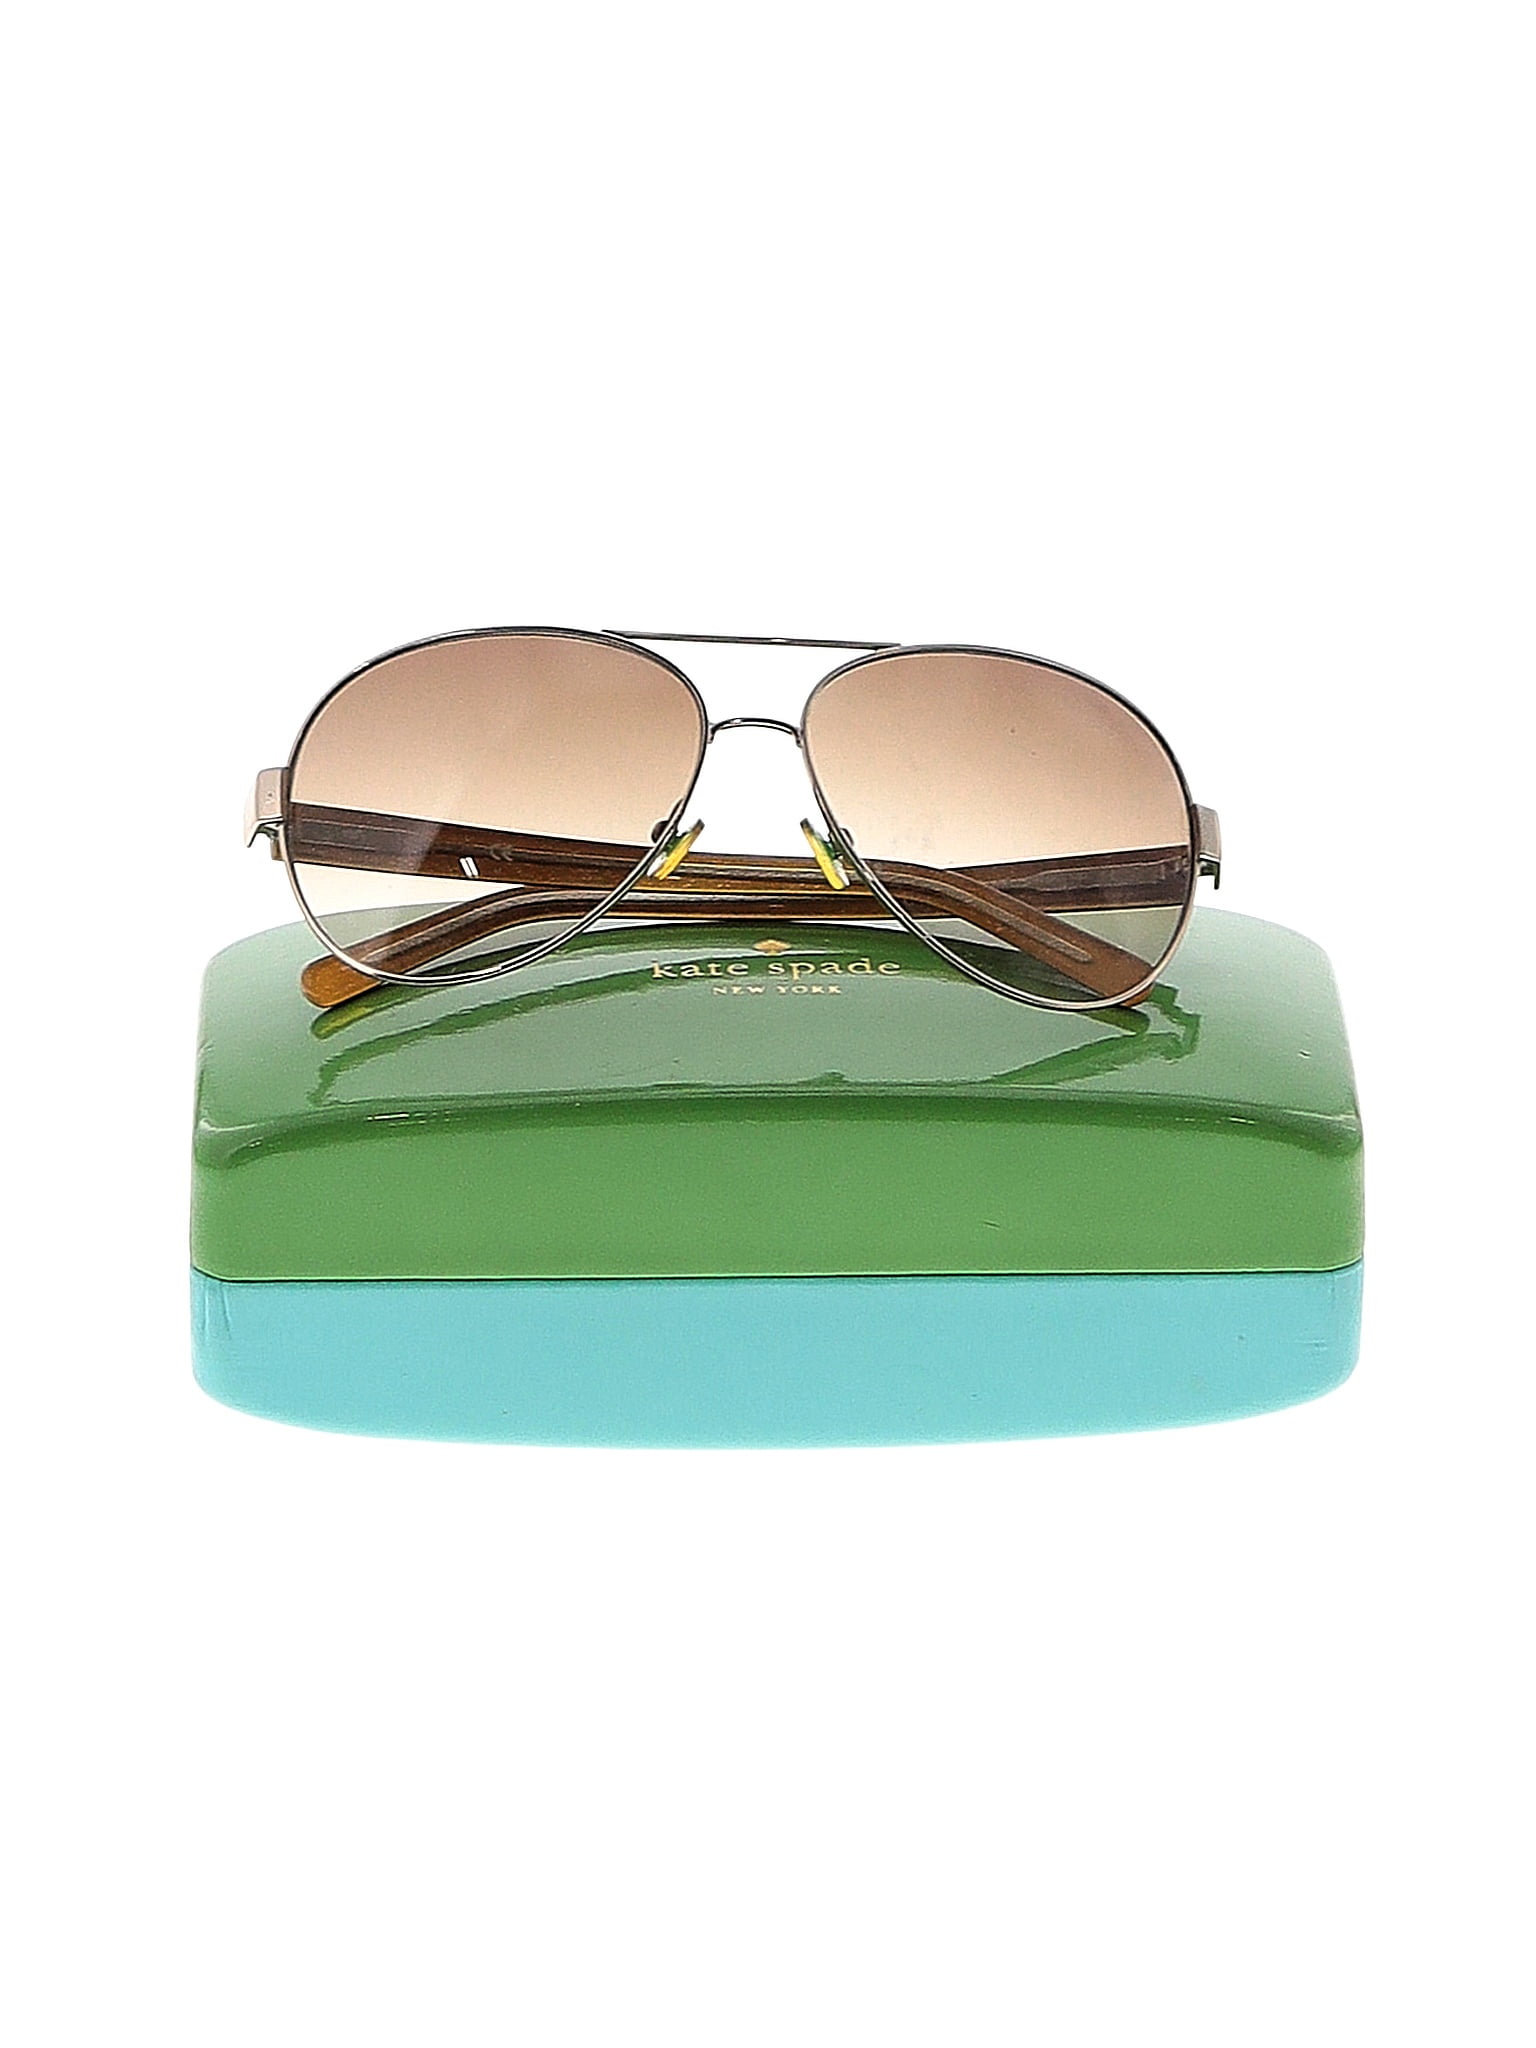 Kate Spade New York One Size Sunglasses